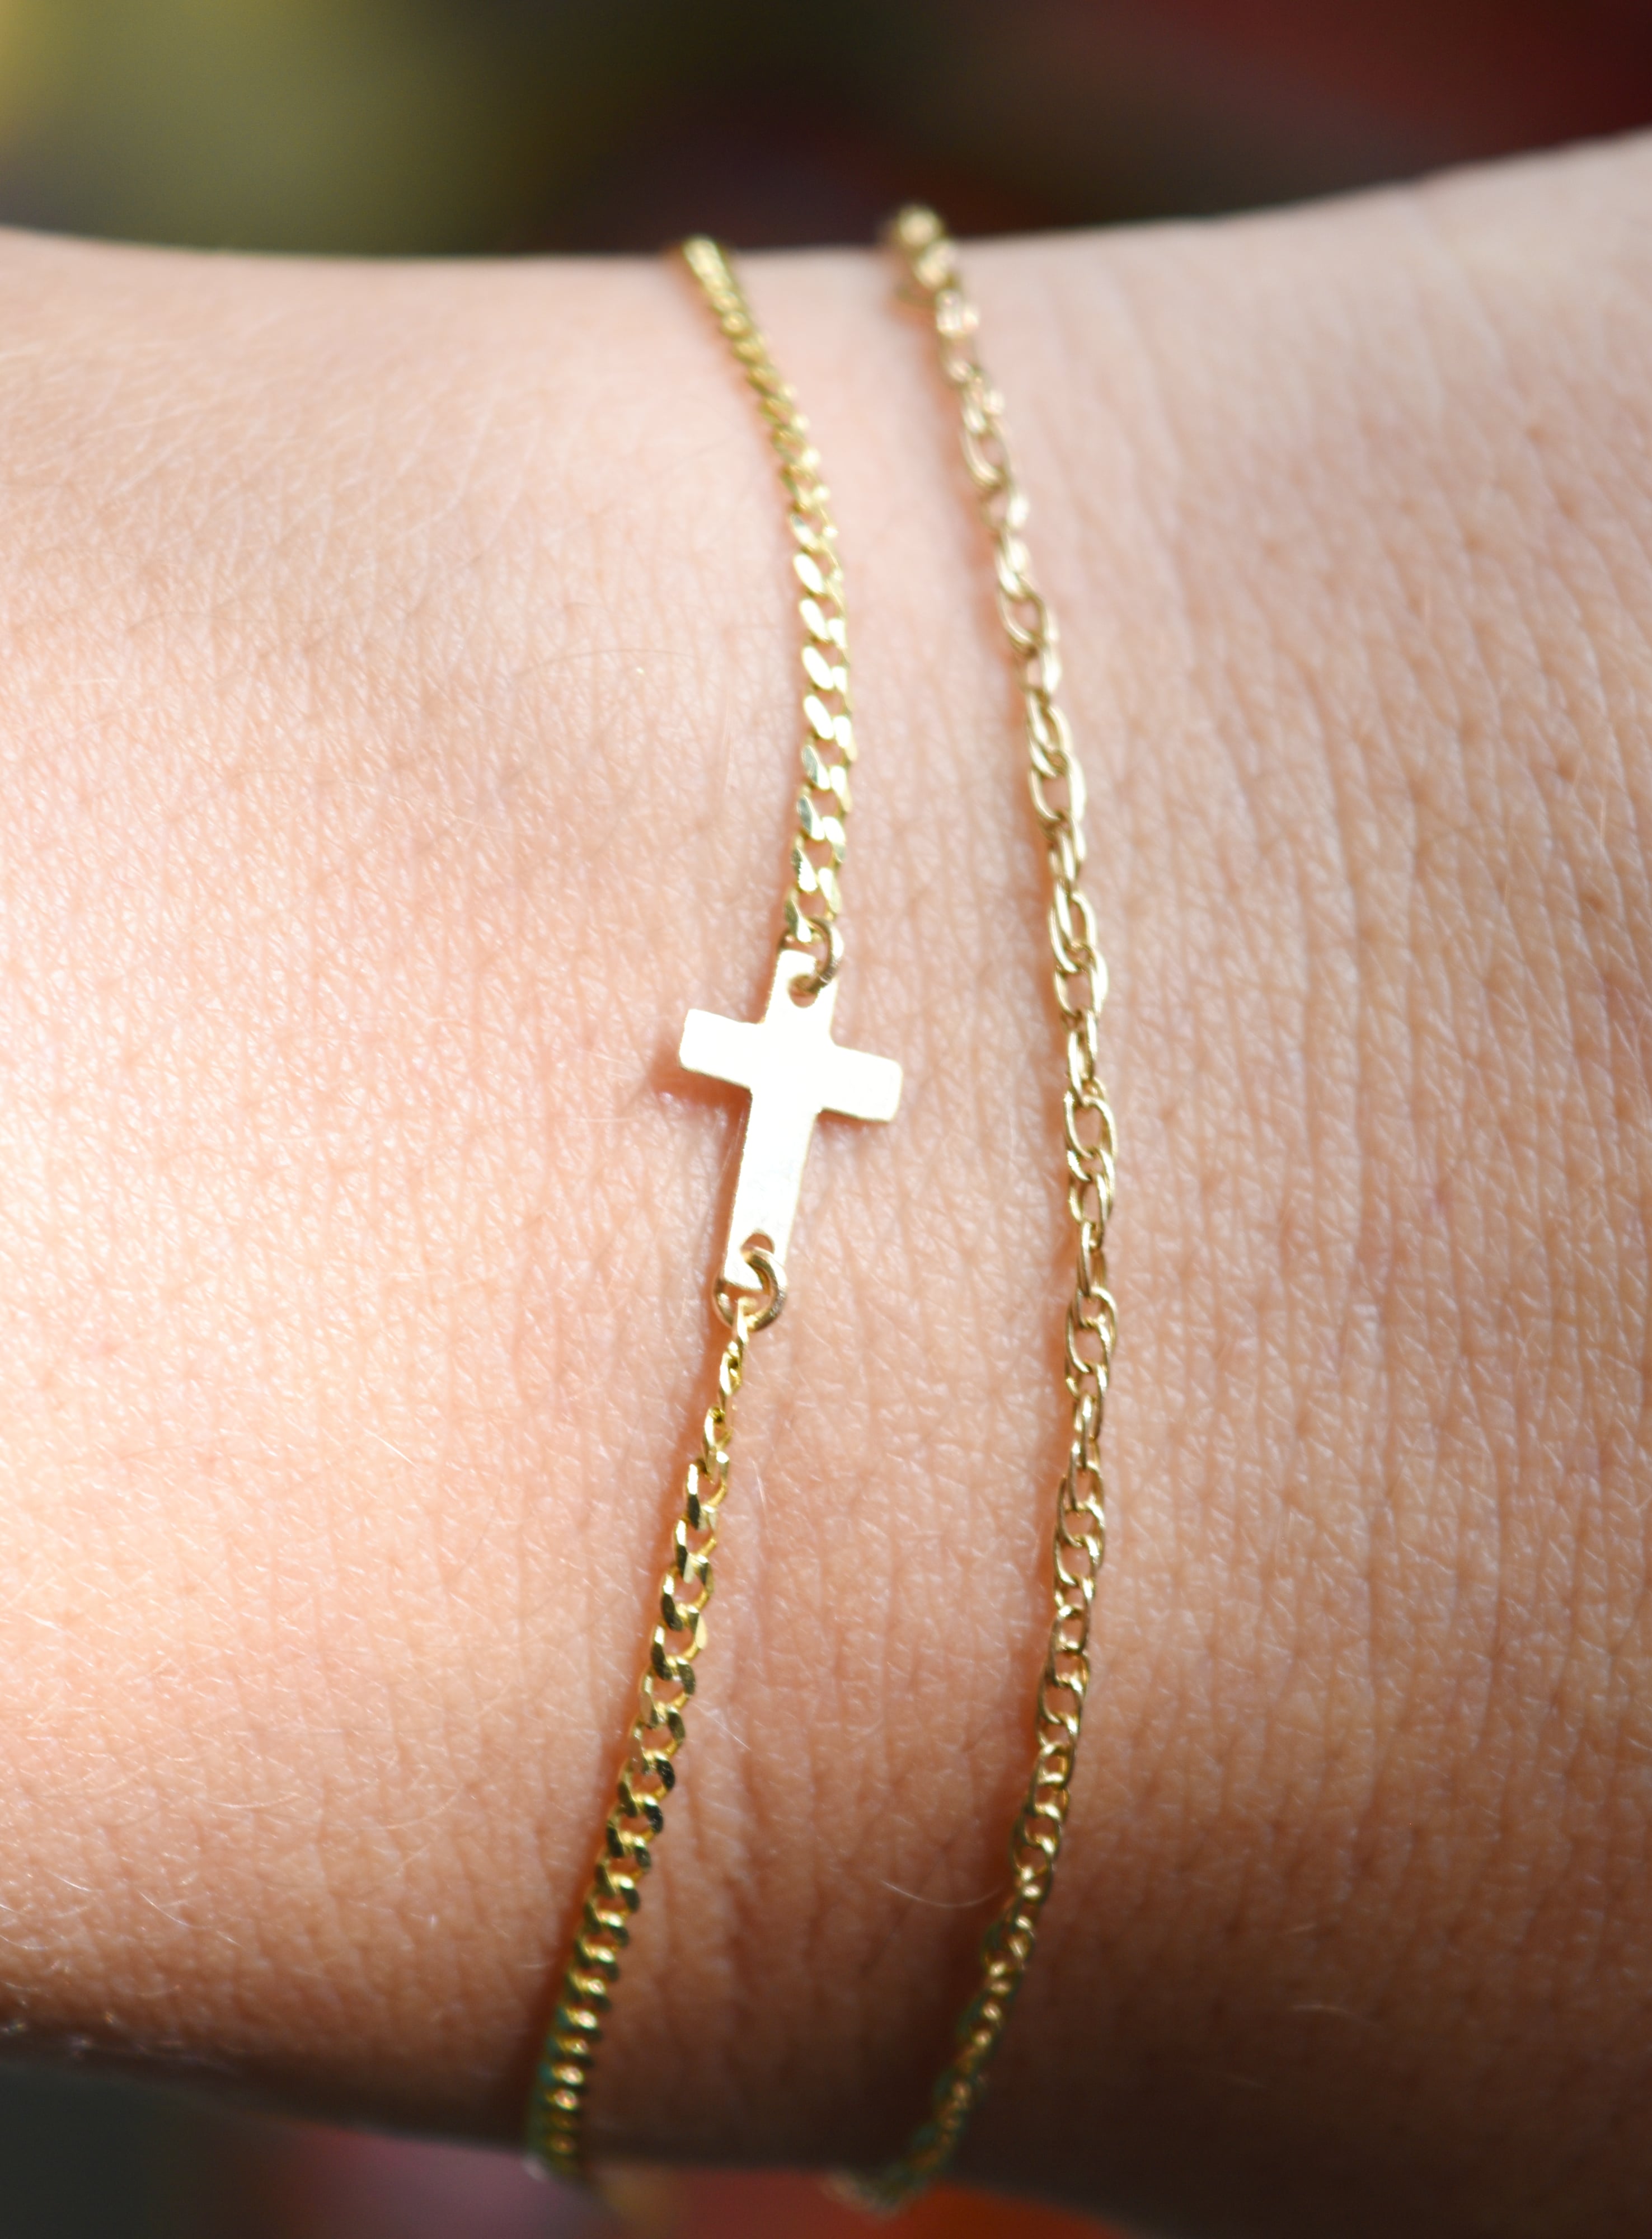 Cross Charm, Gold Filled, Sterling Silver, Permanent Jewelry Charms, Tiny  Charms, Bulk Charms Silver, Wholesale Gold Charms, CH05 